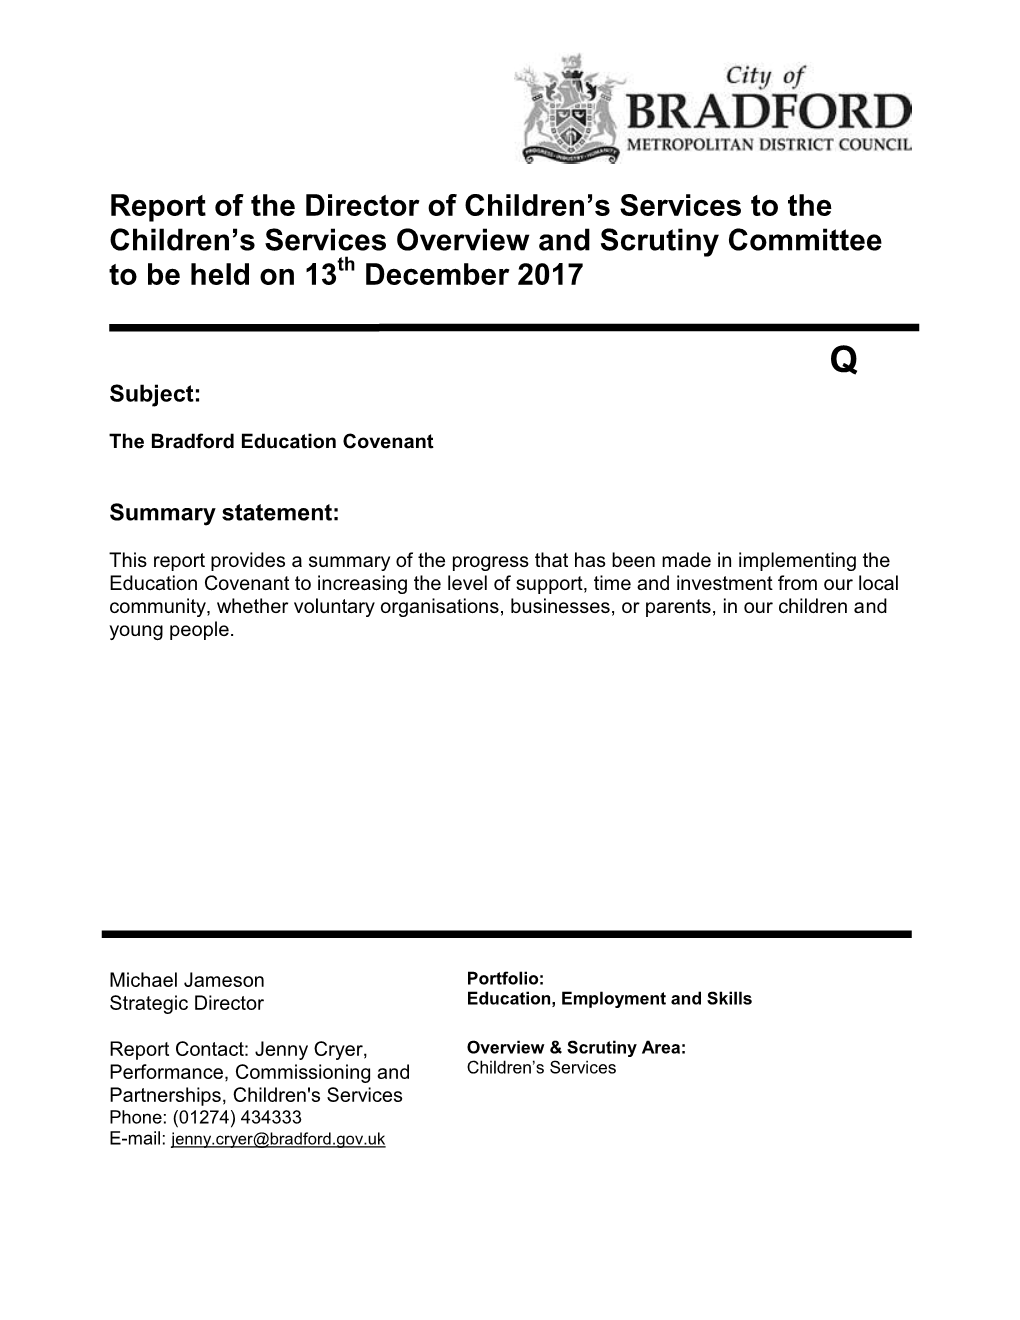 Director of Children’S Services to the Children’S Services Overview and Scrutiny Committee to Be Held on 13Th December 2017